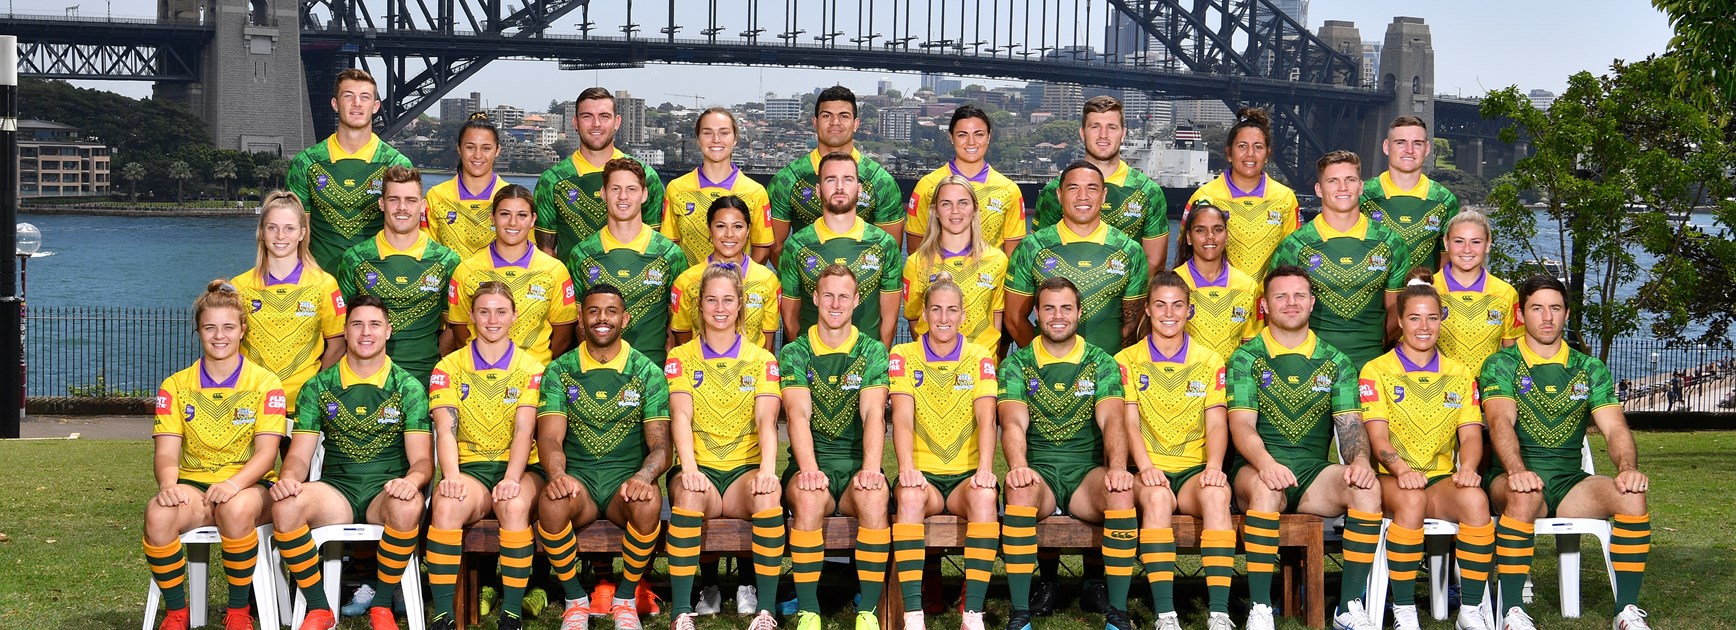 2019 World Cup Nines squads and player numbers